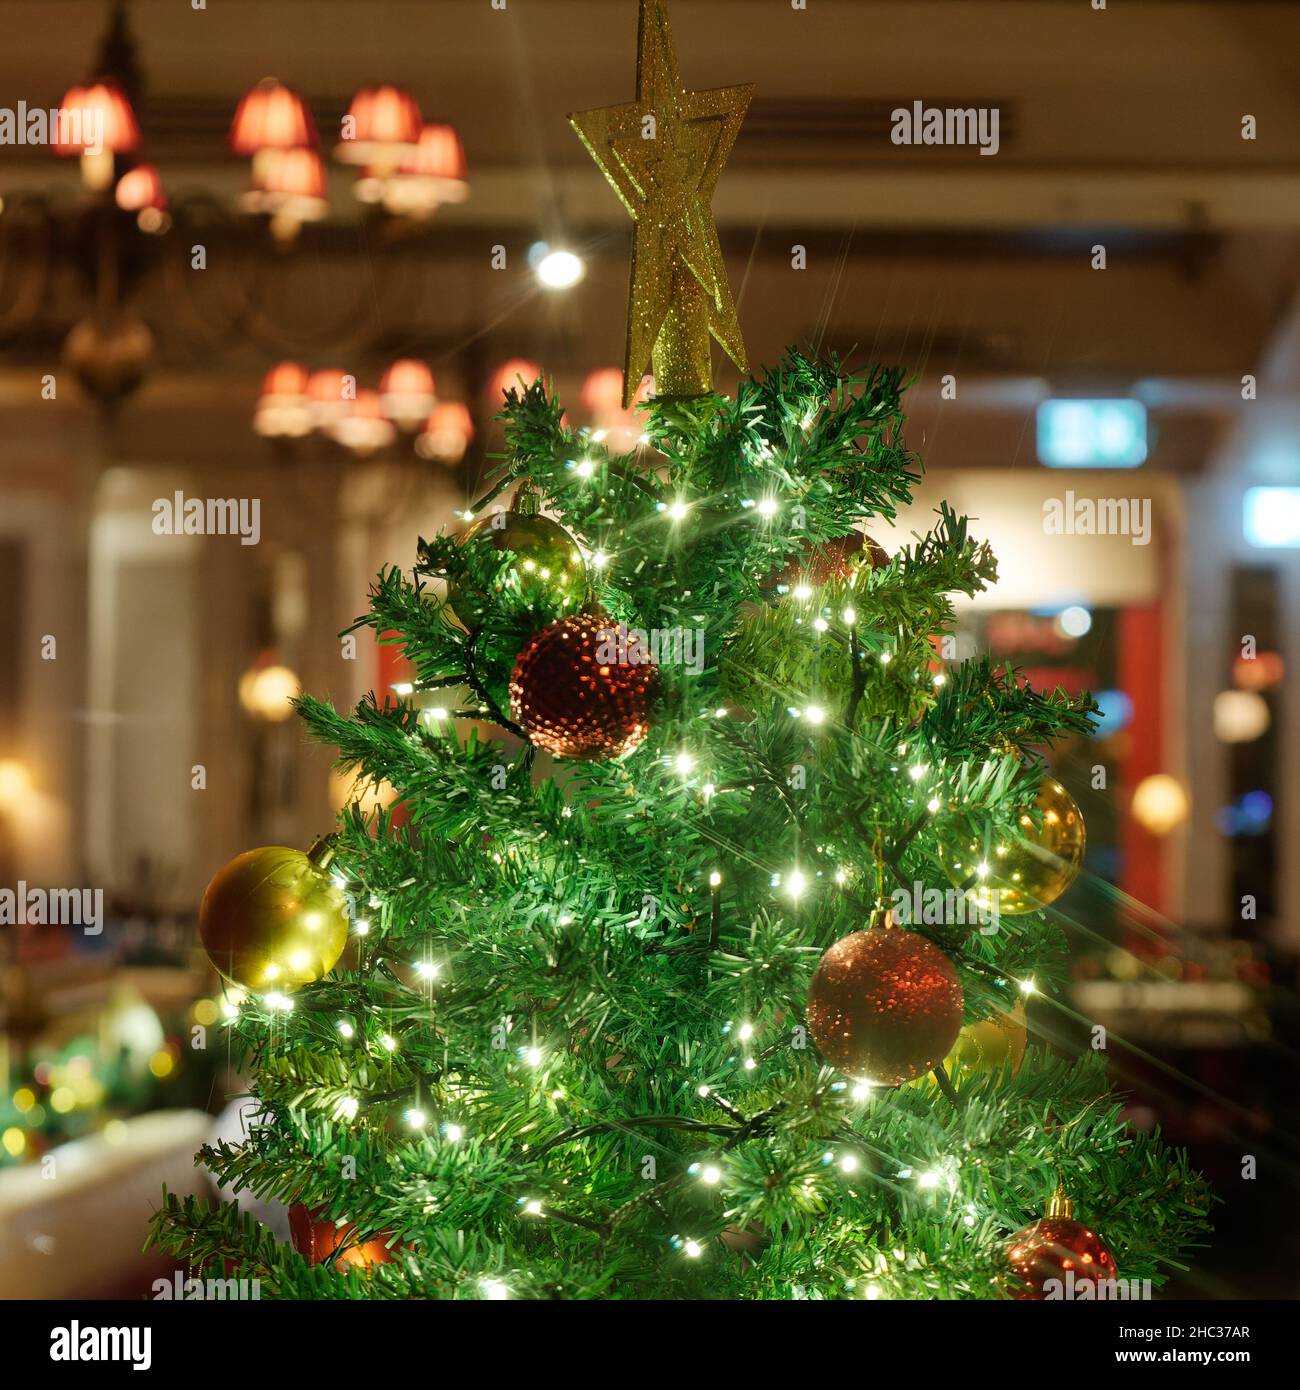 Londra, Grande Londra, Inghilterra, Dicembre 15 2021: Top of a Christmas Tree with decorations and a star in a Restaurant. Foto Stock